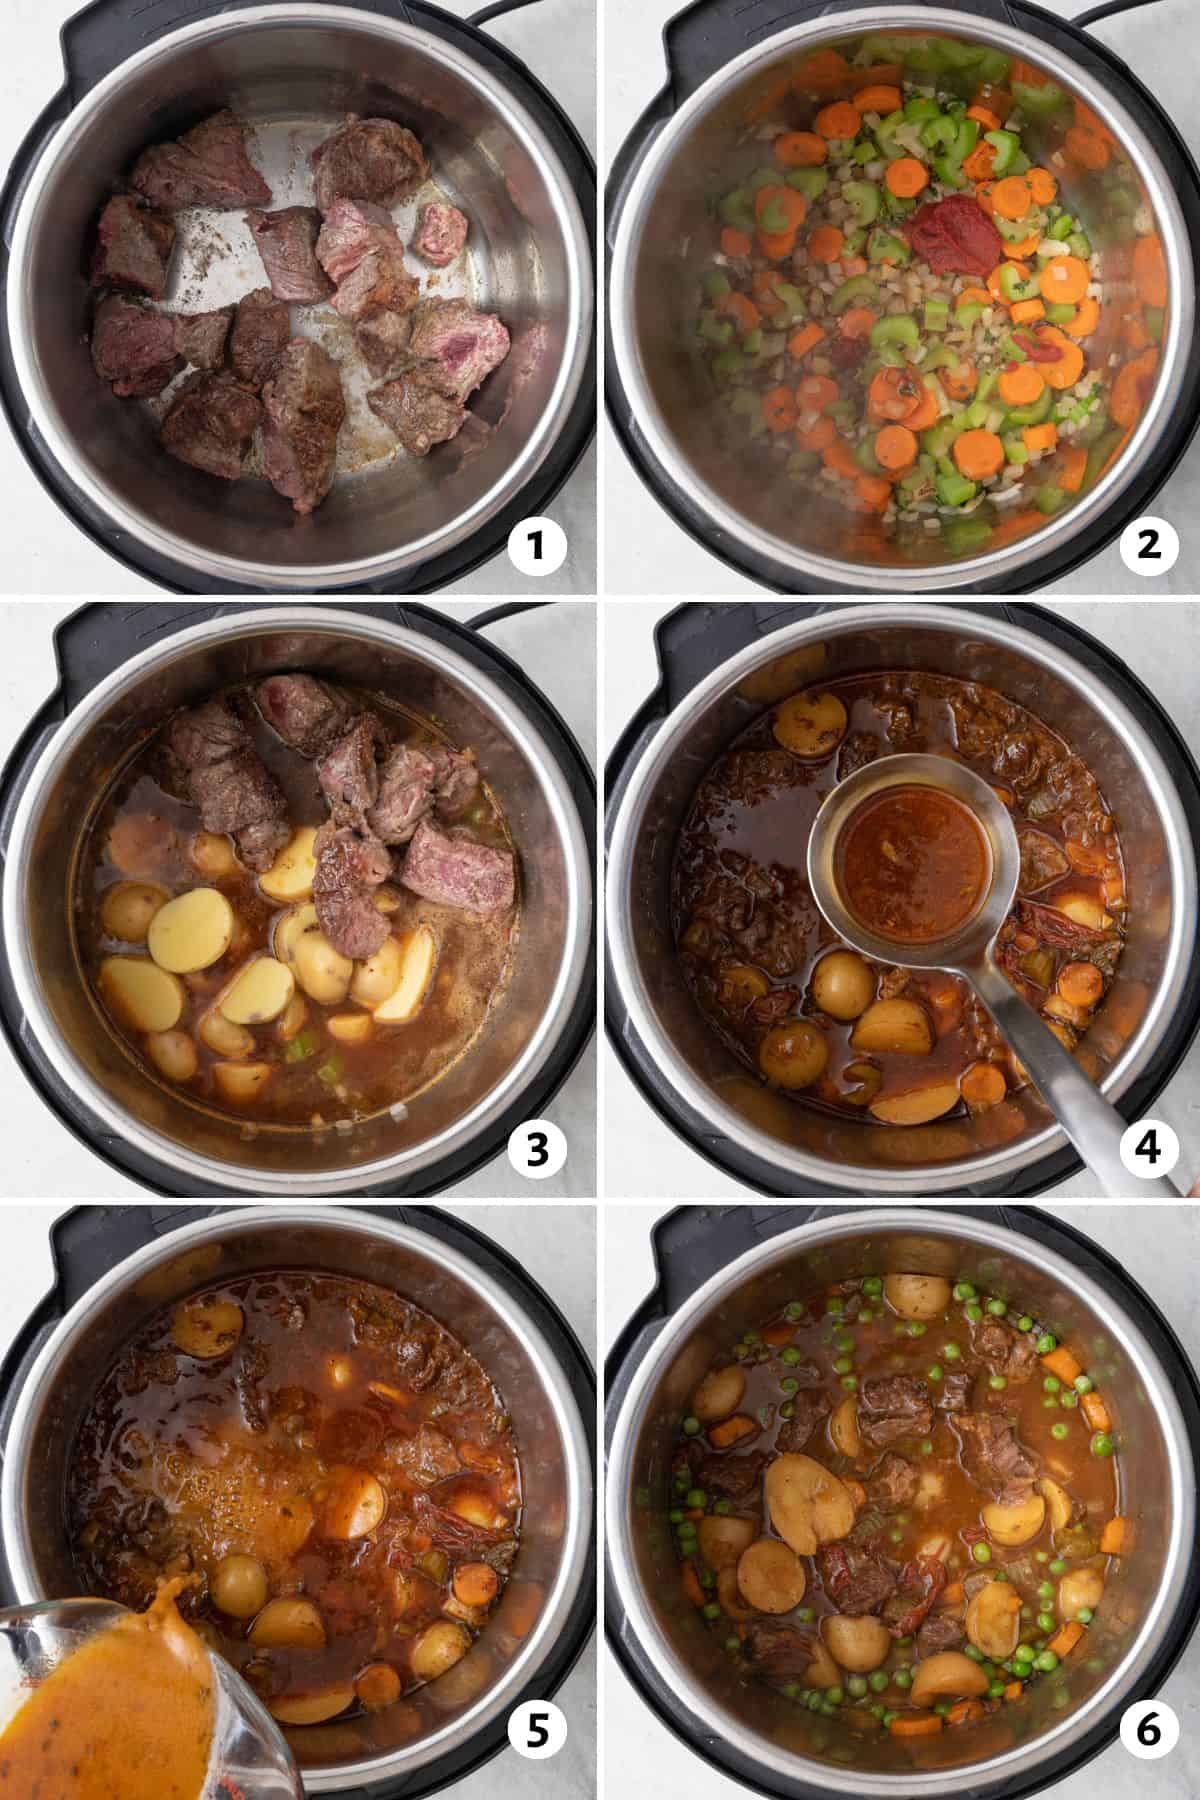 6 image collage making recipe in Instant Pot: 1- flour coated beef added and partially browned, 2- beef removed with veggies added and cooked, 3- broth, potatoes, and beef added to cooked veggies, 4- ladle removing some broth from pot, 5- broth slurry added back to pot, 6- after thickening.